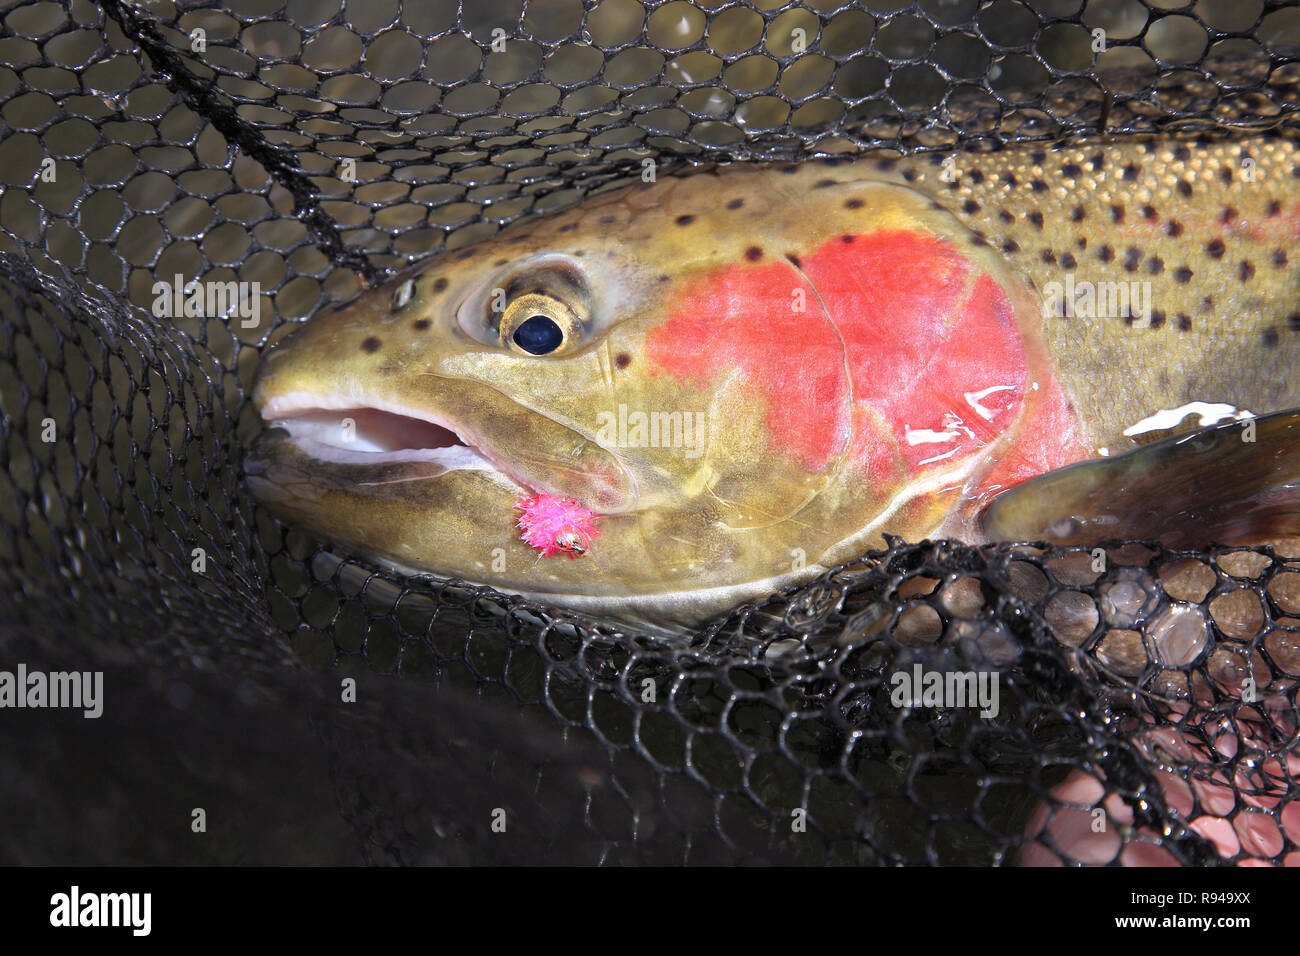 freshly caught steelhead trout in a net with pink lure in mouth closeup Stock Photo